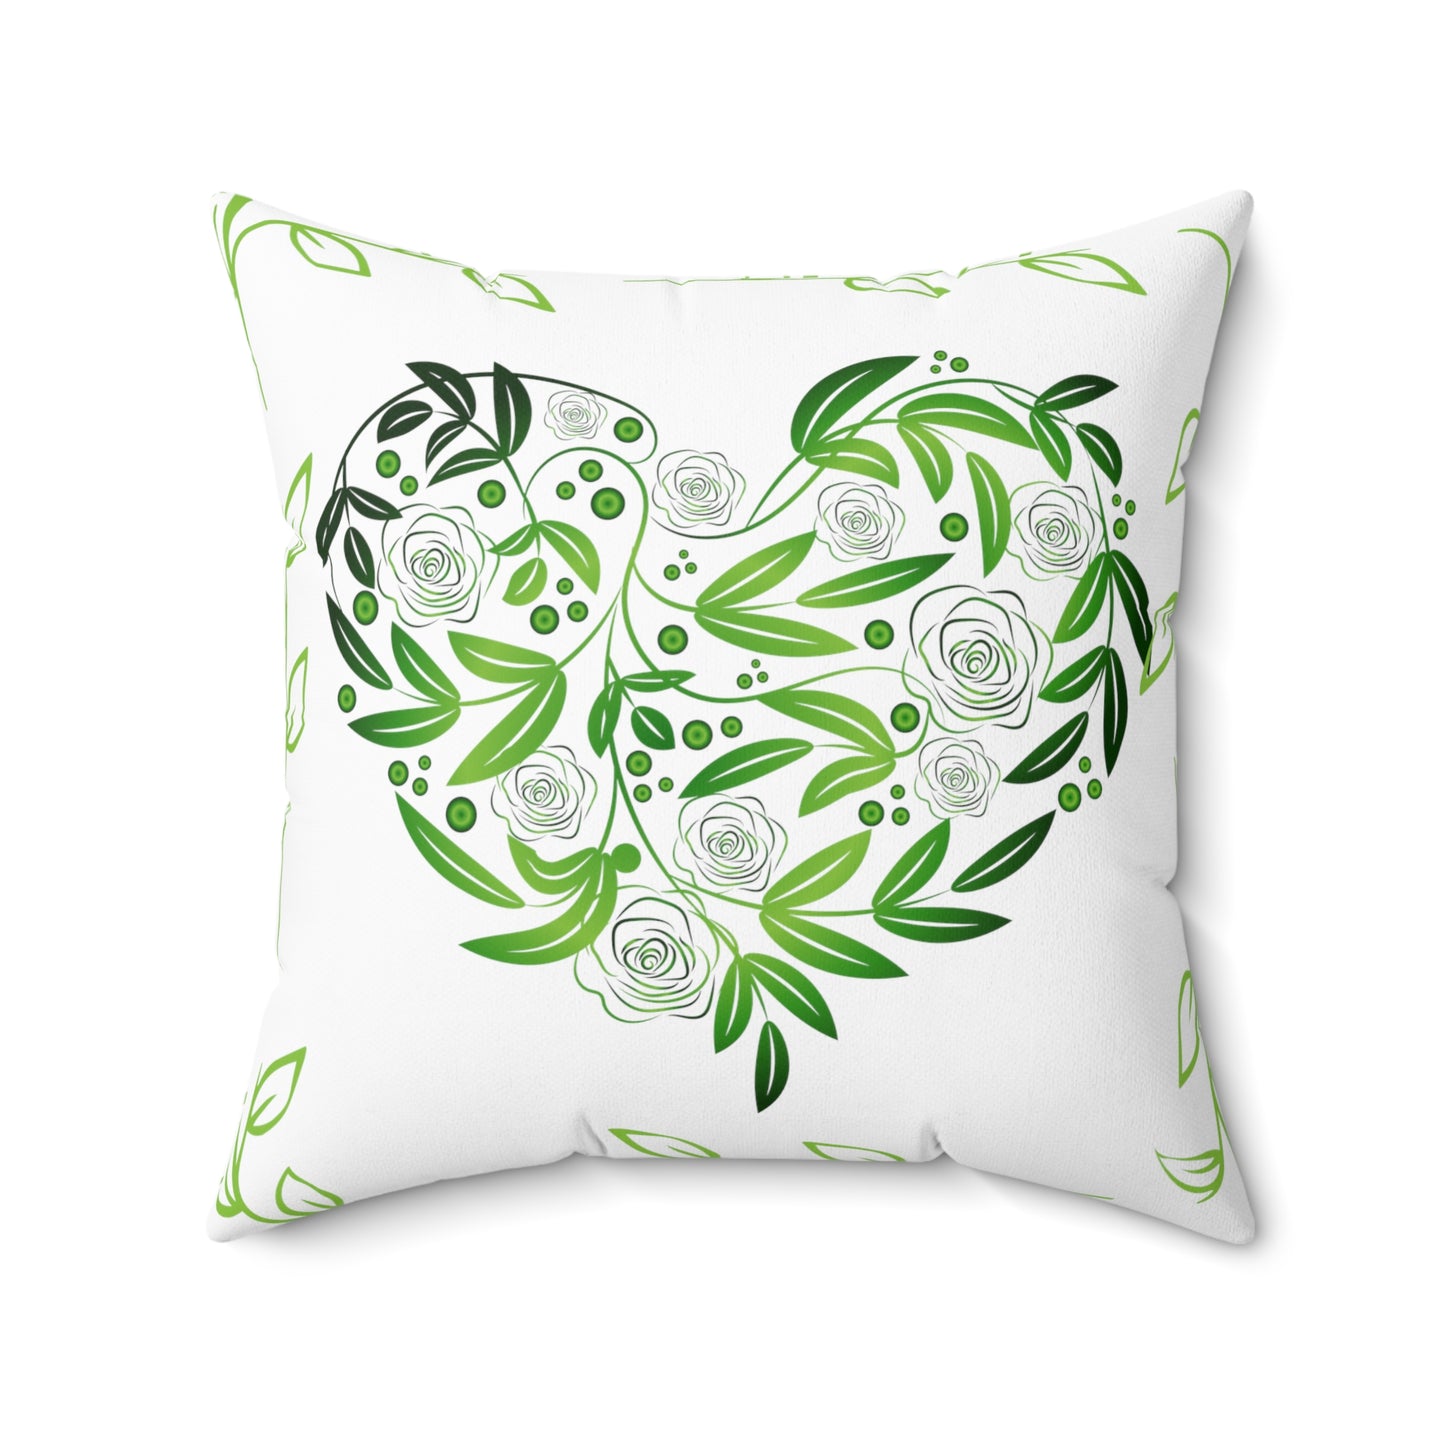 Decorator Pillow - Beautiful Indoor Green Floral Heart Pillow, Spun Polyester Square Pillow, Indoor Pillow for Living Room Couch or Bedroom